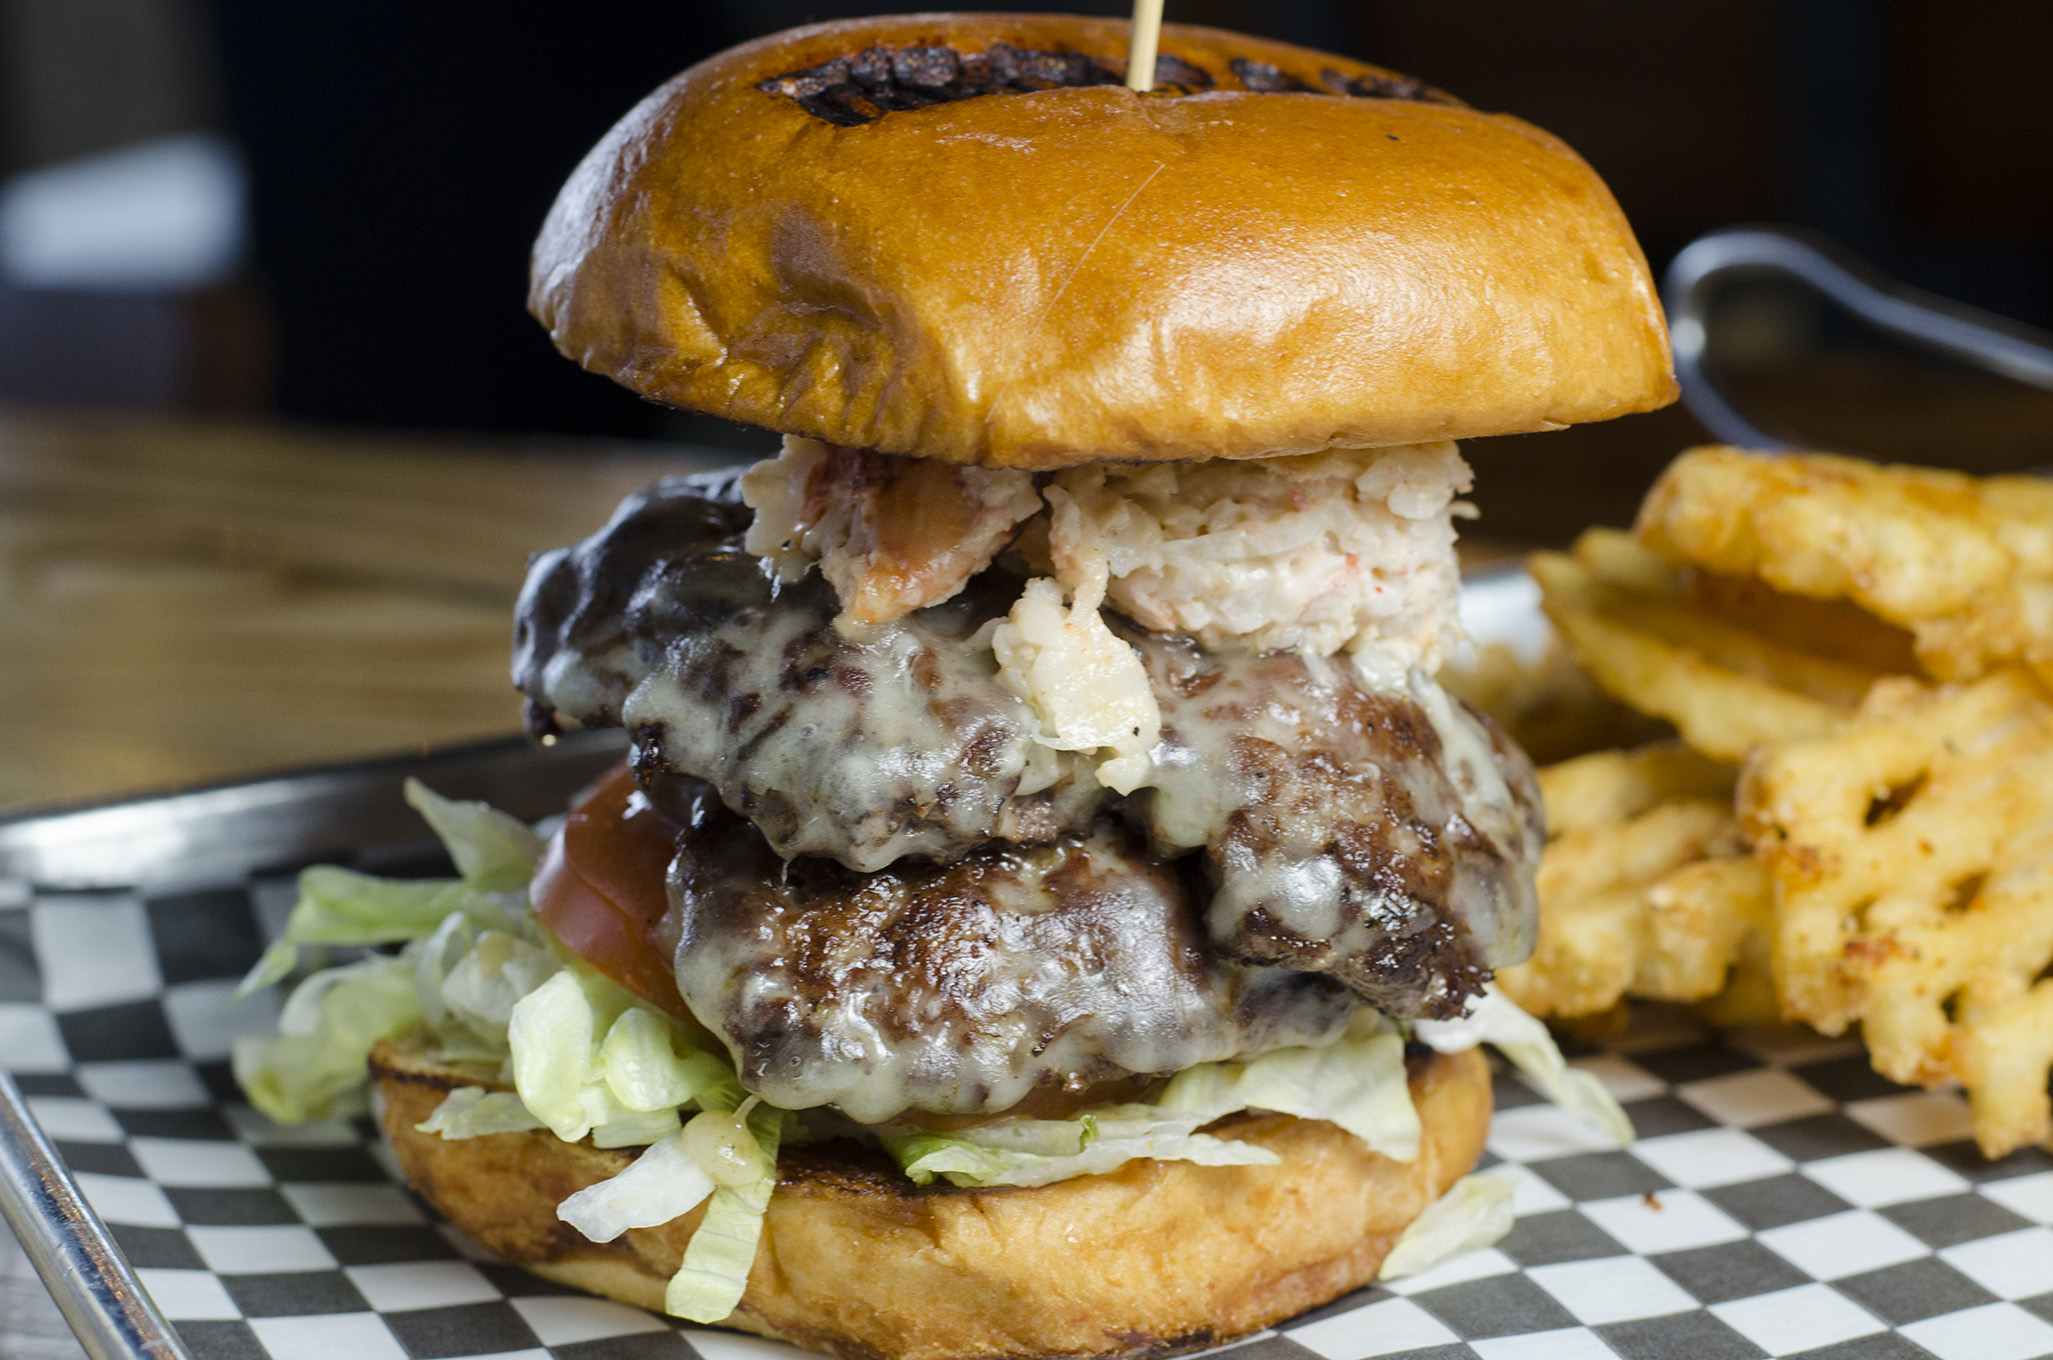 The Surf n' Turf burger from The G.O.A.T.